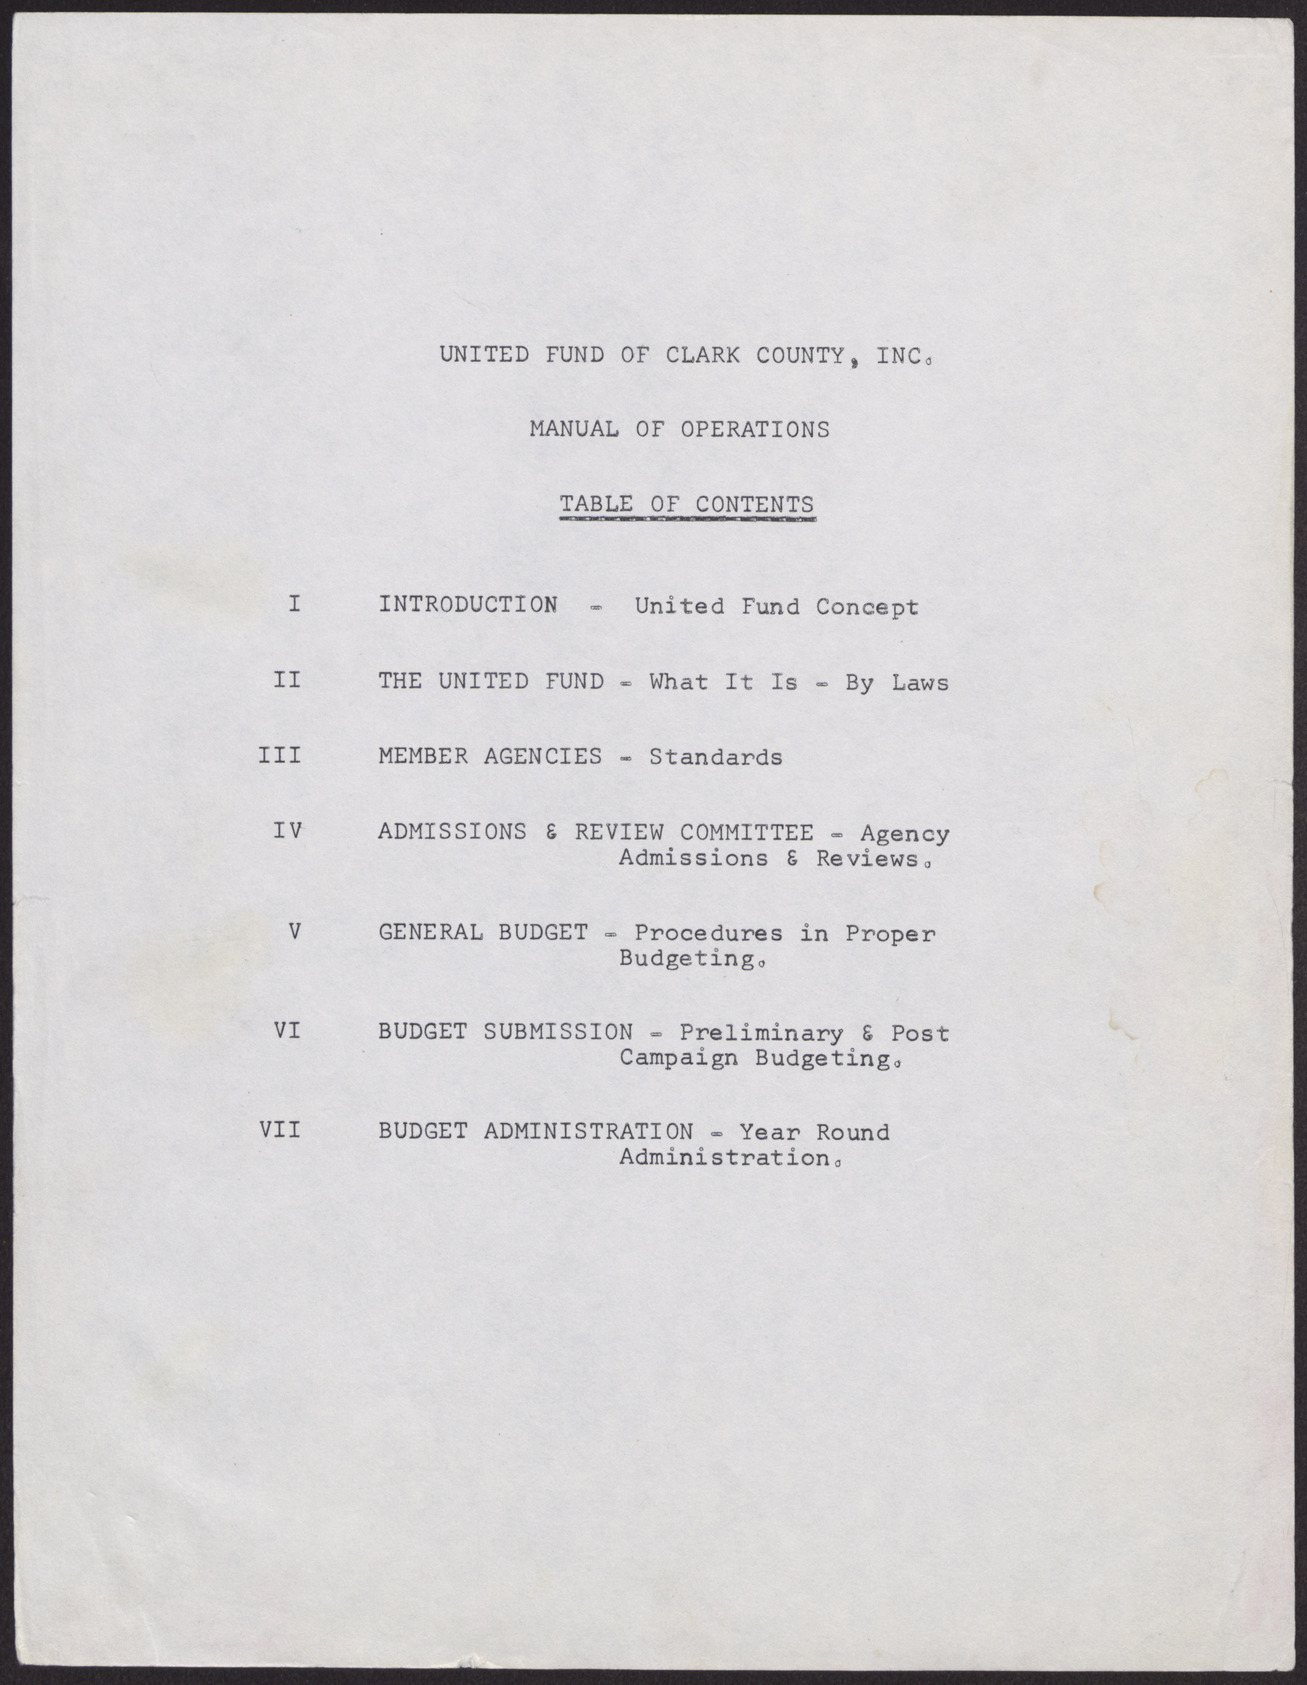 United Fund of Clark County, Inc. Manual of Operations (8 pages, possibly out of sequence or unrelated), no date